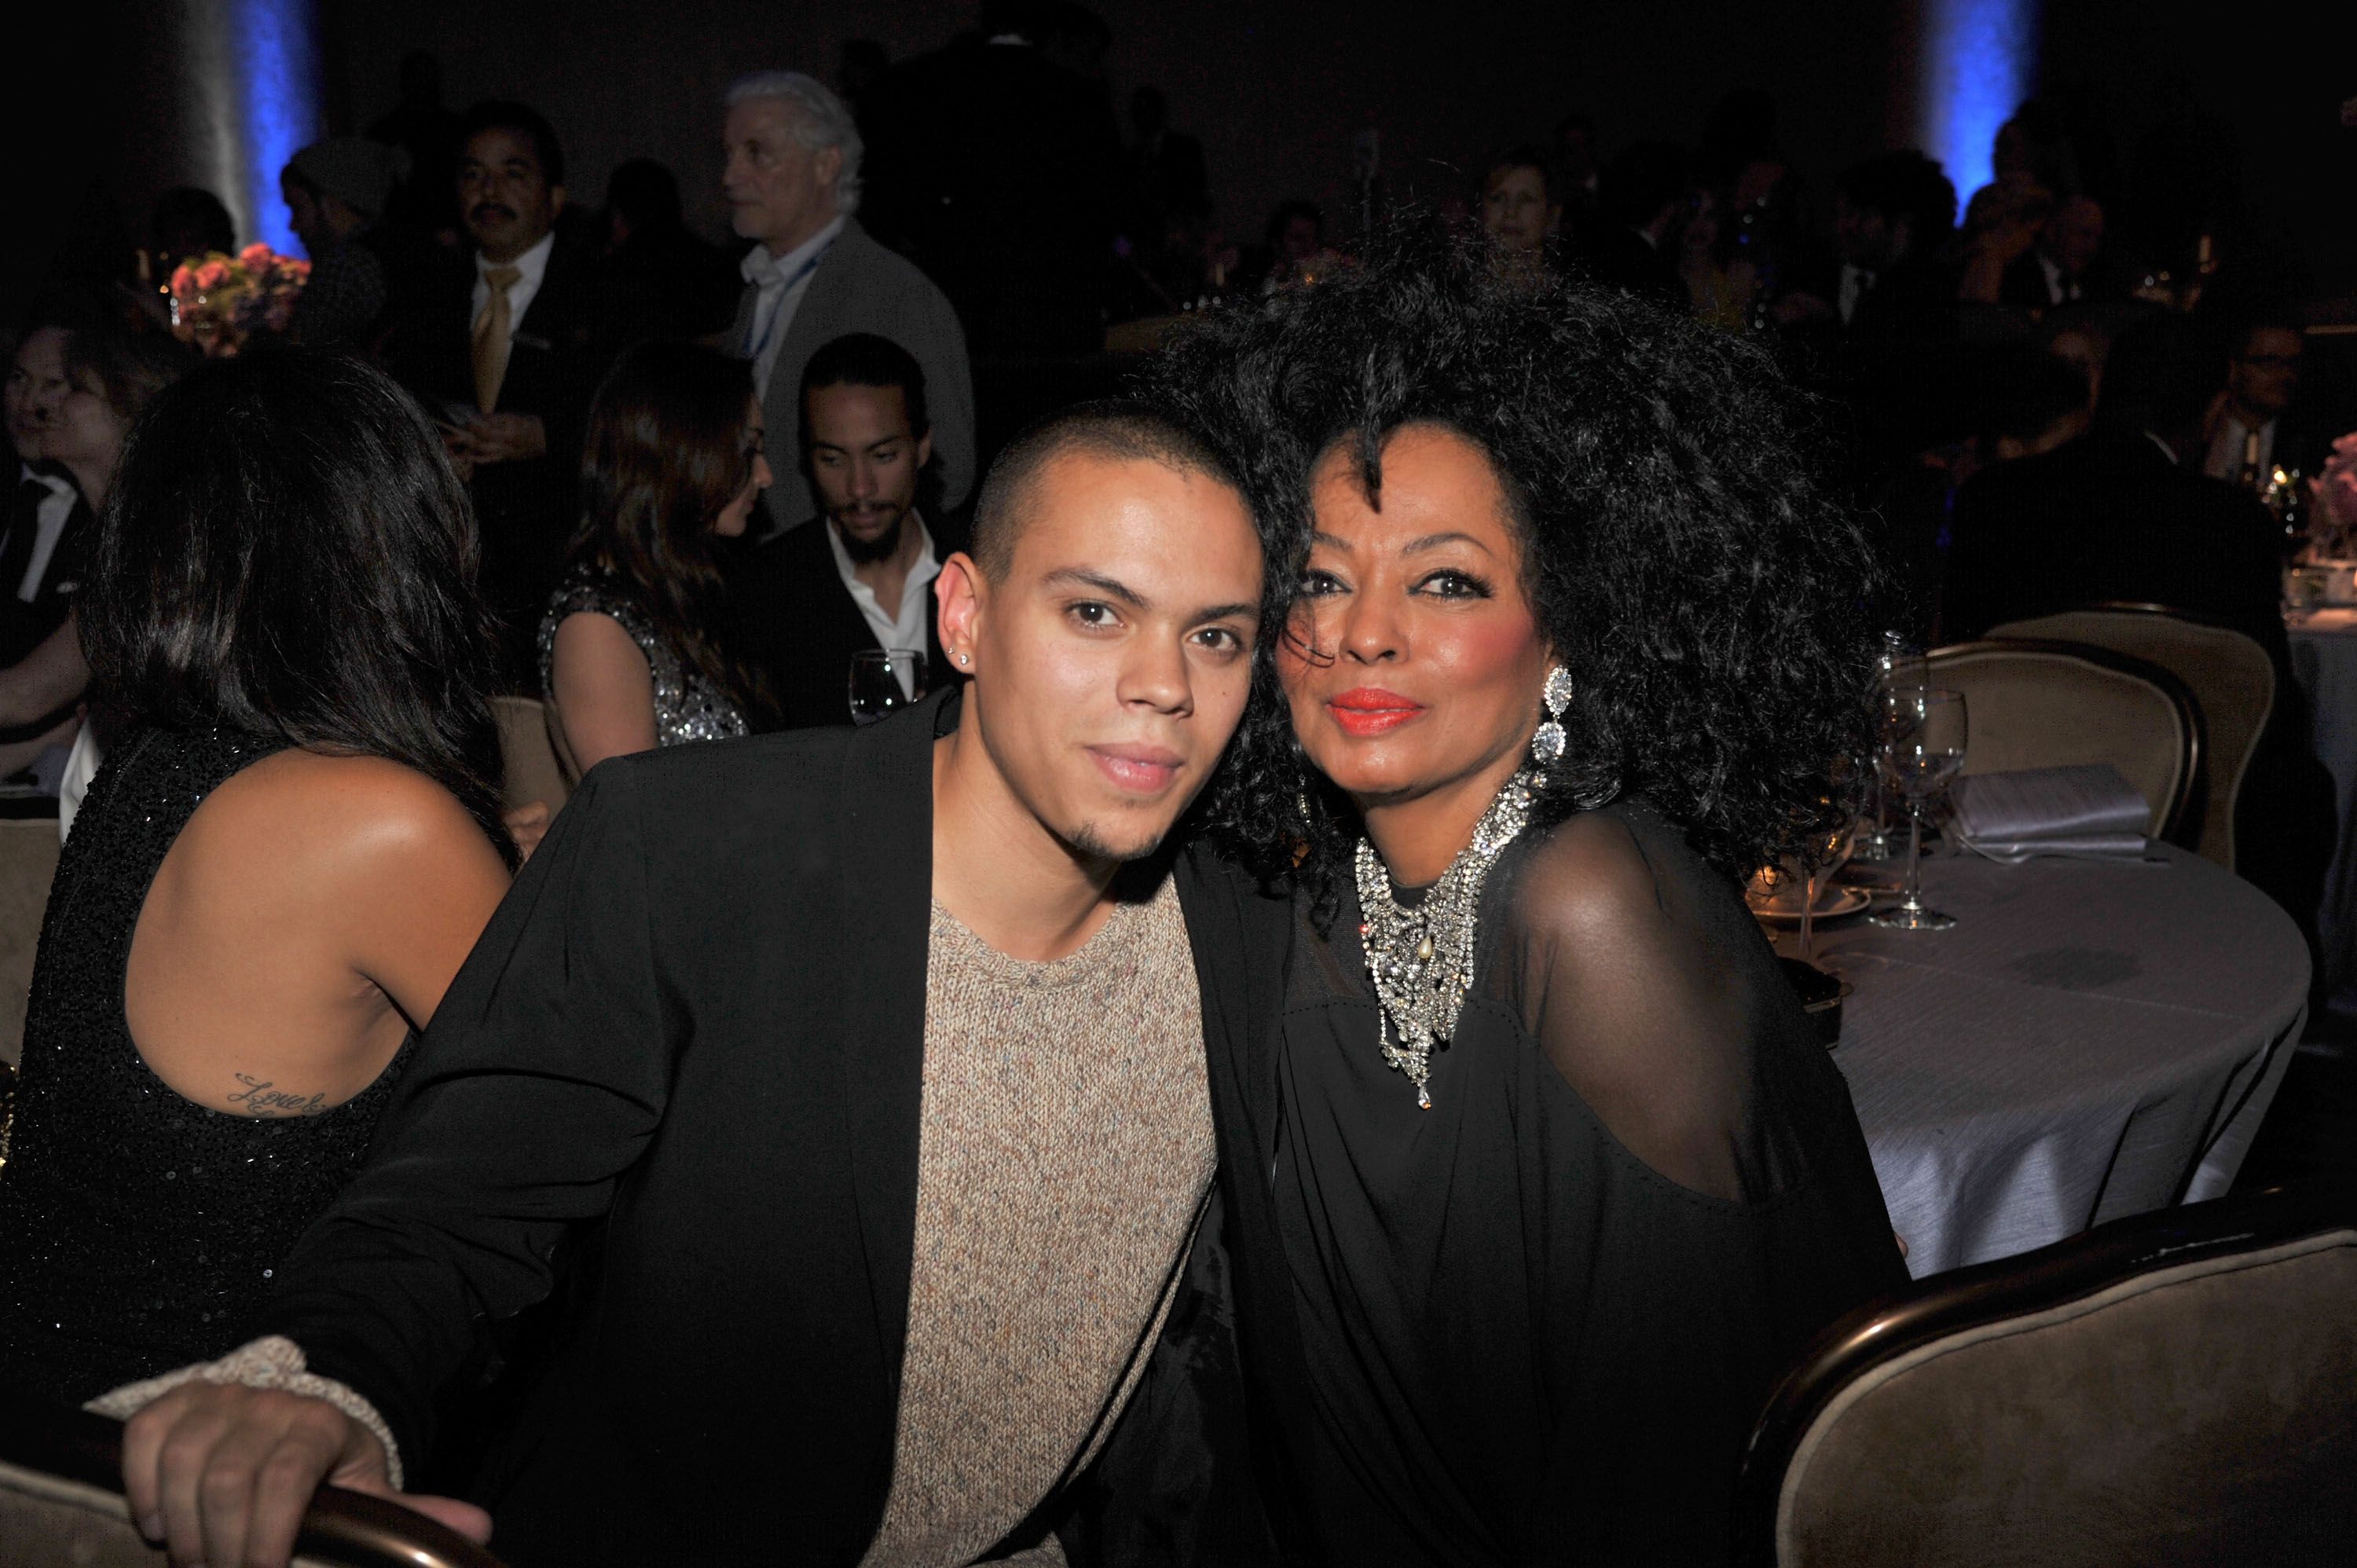 Evan Ross and mom Diana Ross attend Clive Davis and The Recording Academy's 2012 Pre-Grammy Gala and Salute to Industry Icons at The Beverly Hilton hotel on February 11, 2012 in California. | Photo: Getty Images